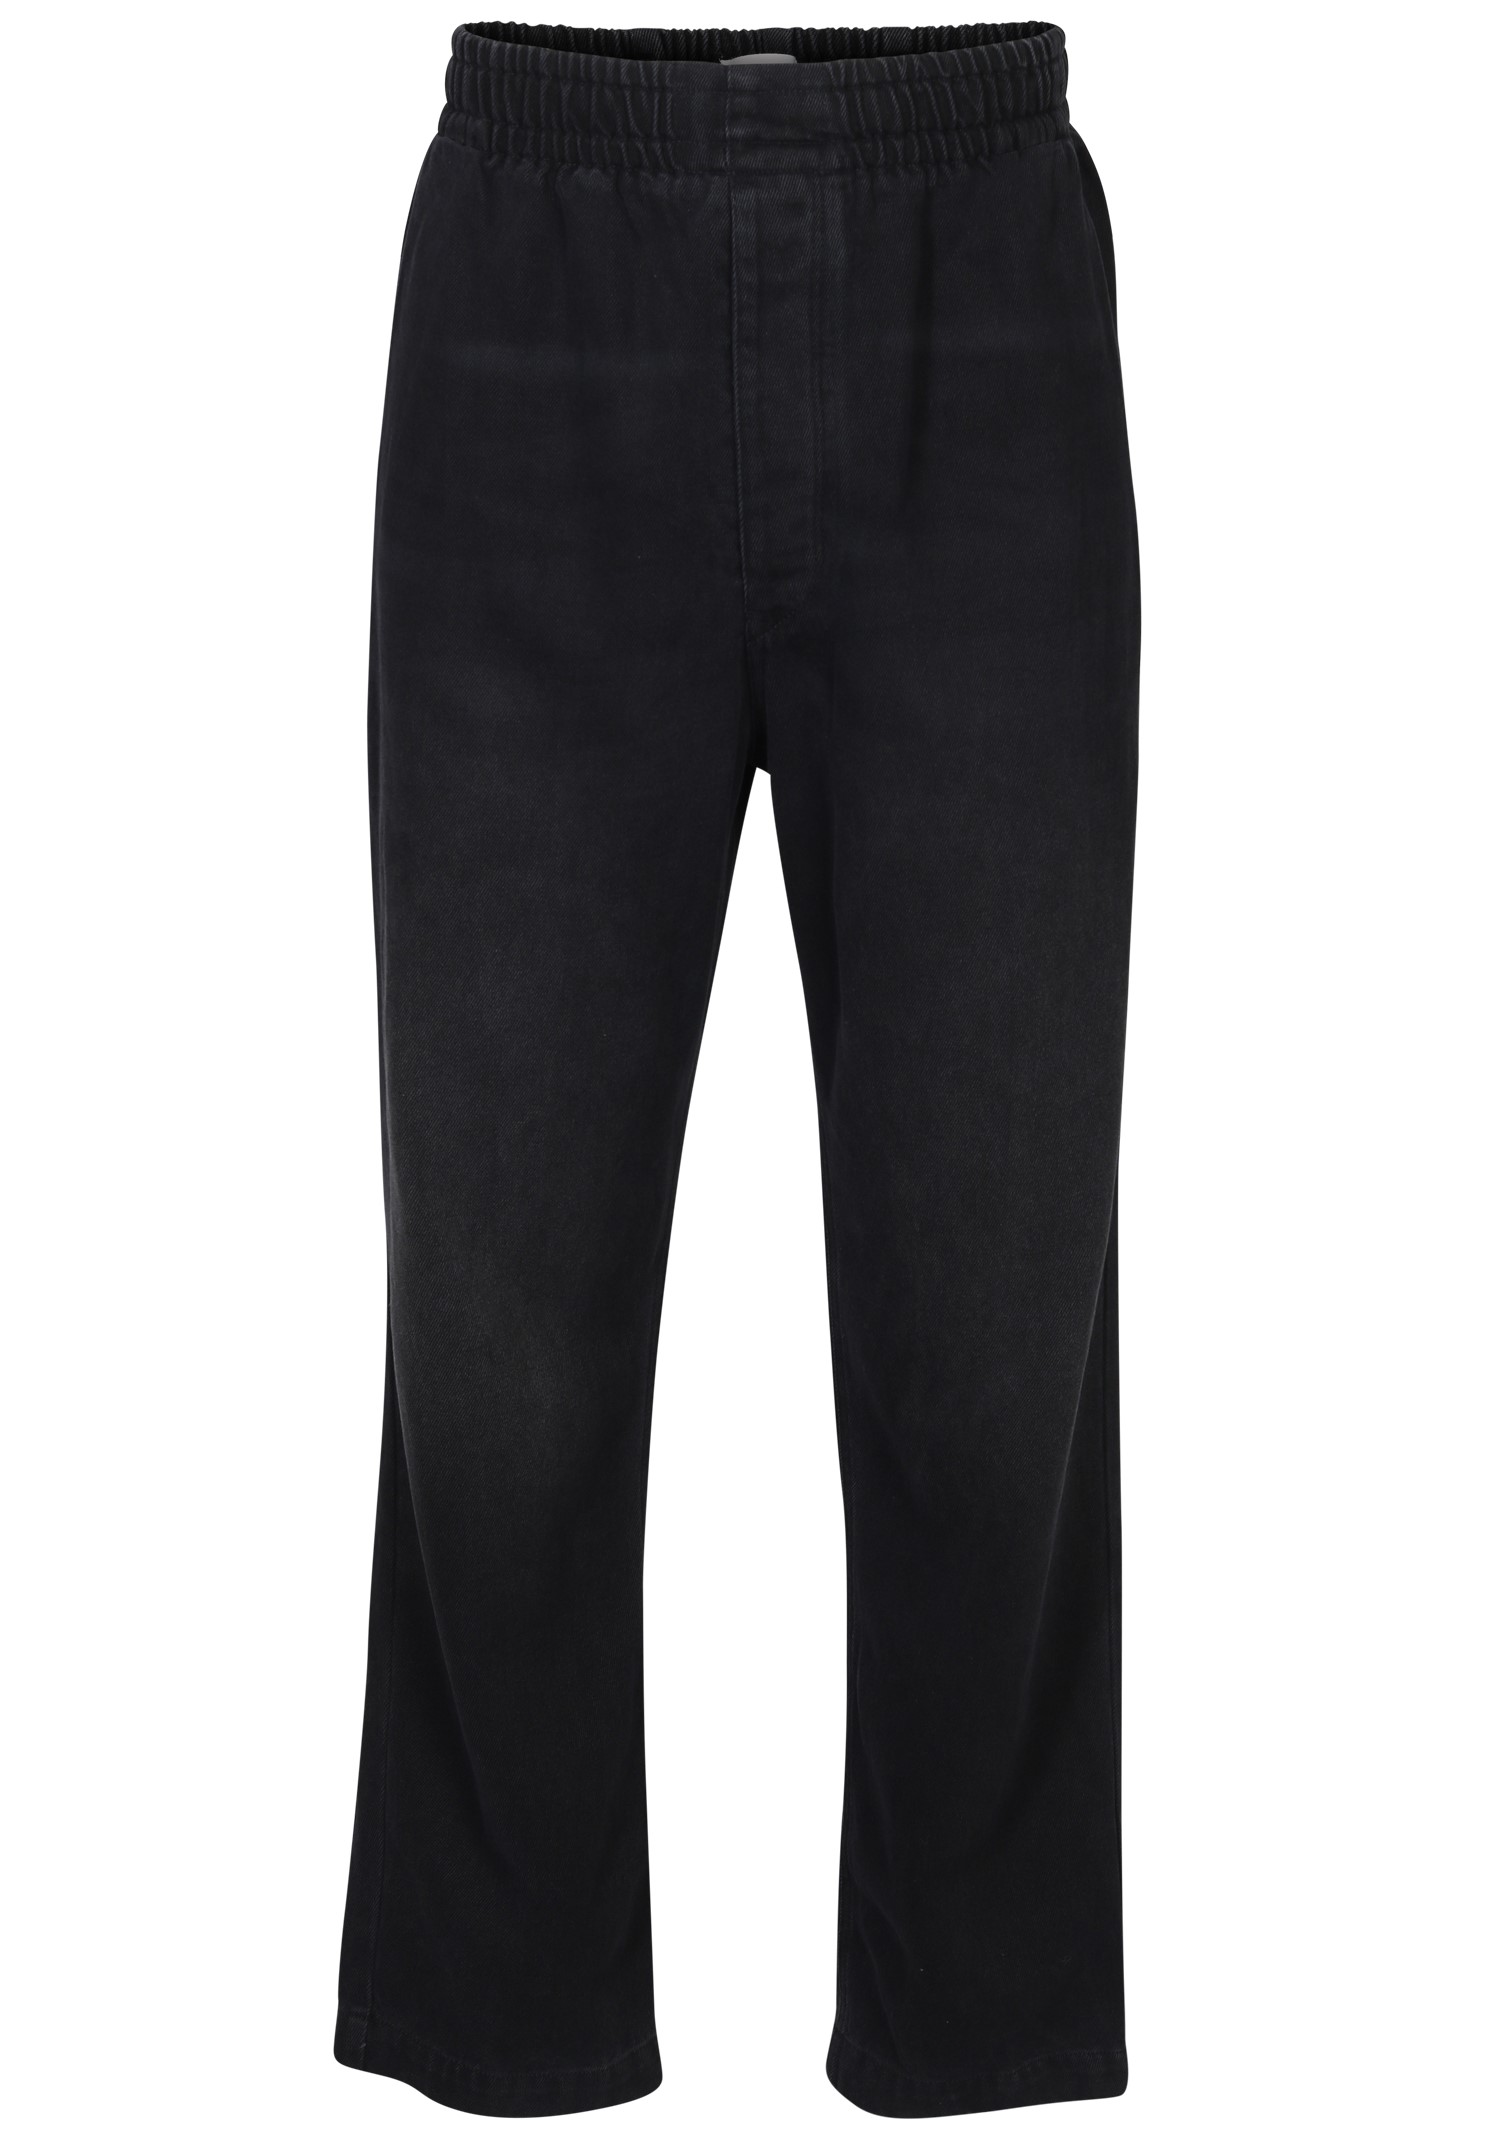 ISABEL MARANT Timeo Pant in Faded Black M